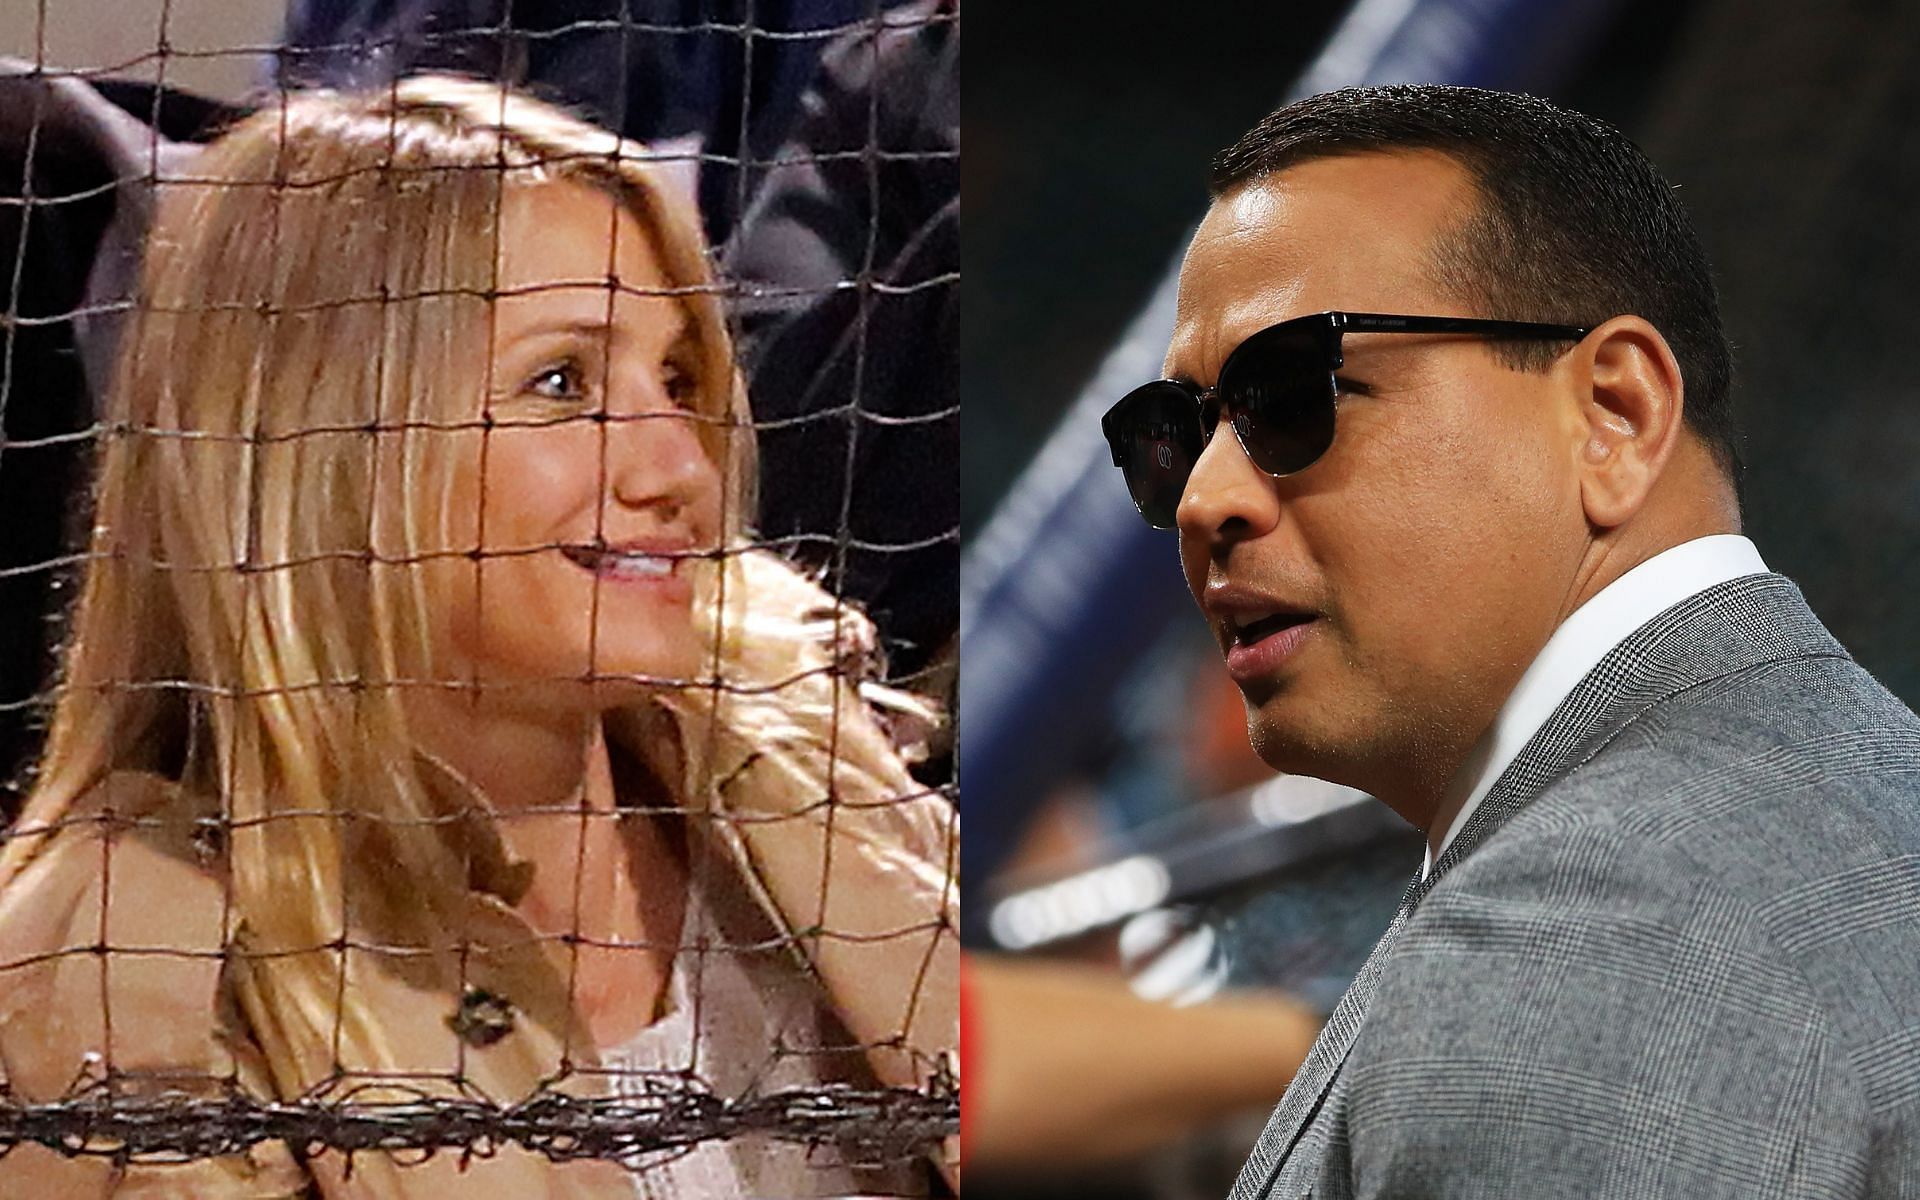 Rodriguez and Diaz were together for nearly a year after his divorce with ex-wife Cynthia Scurtis